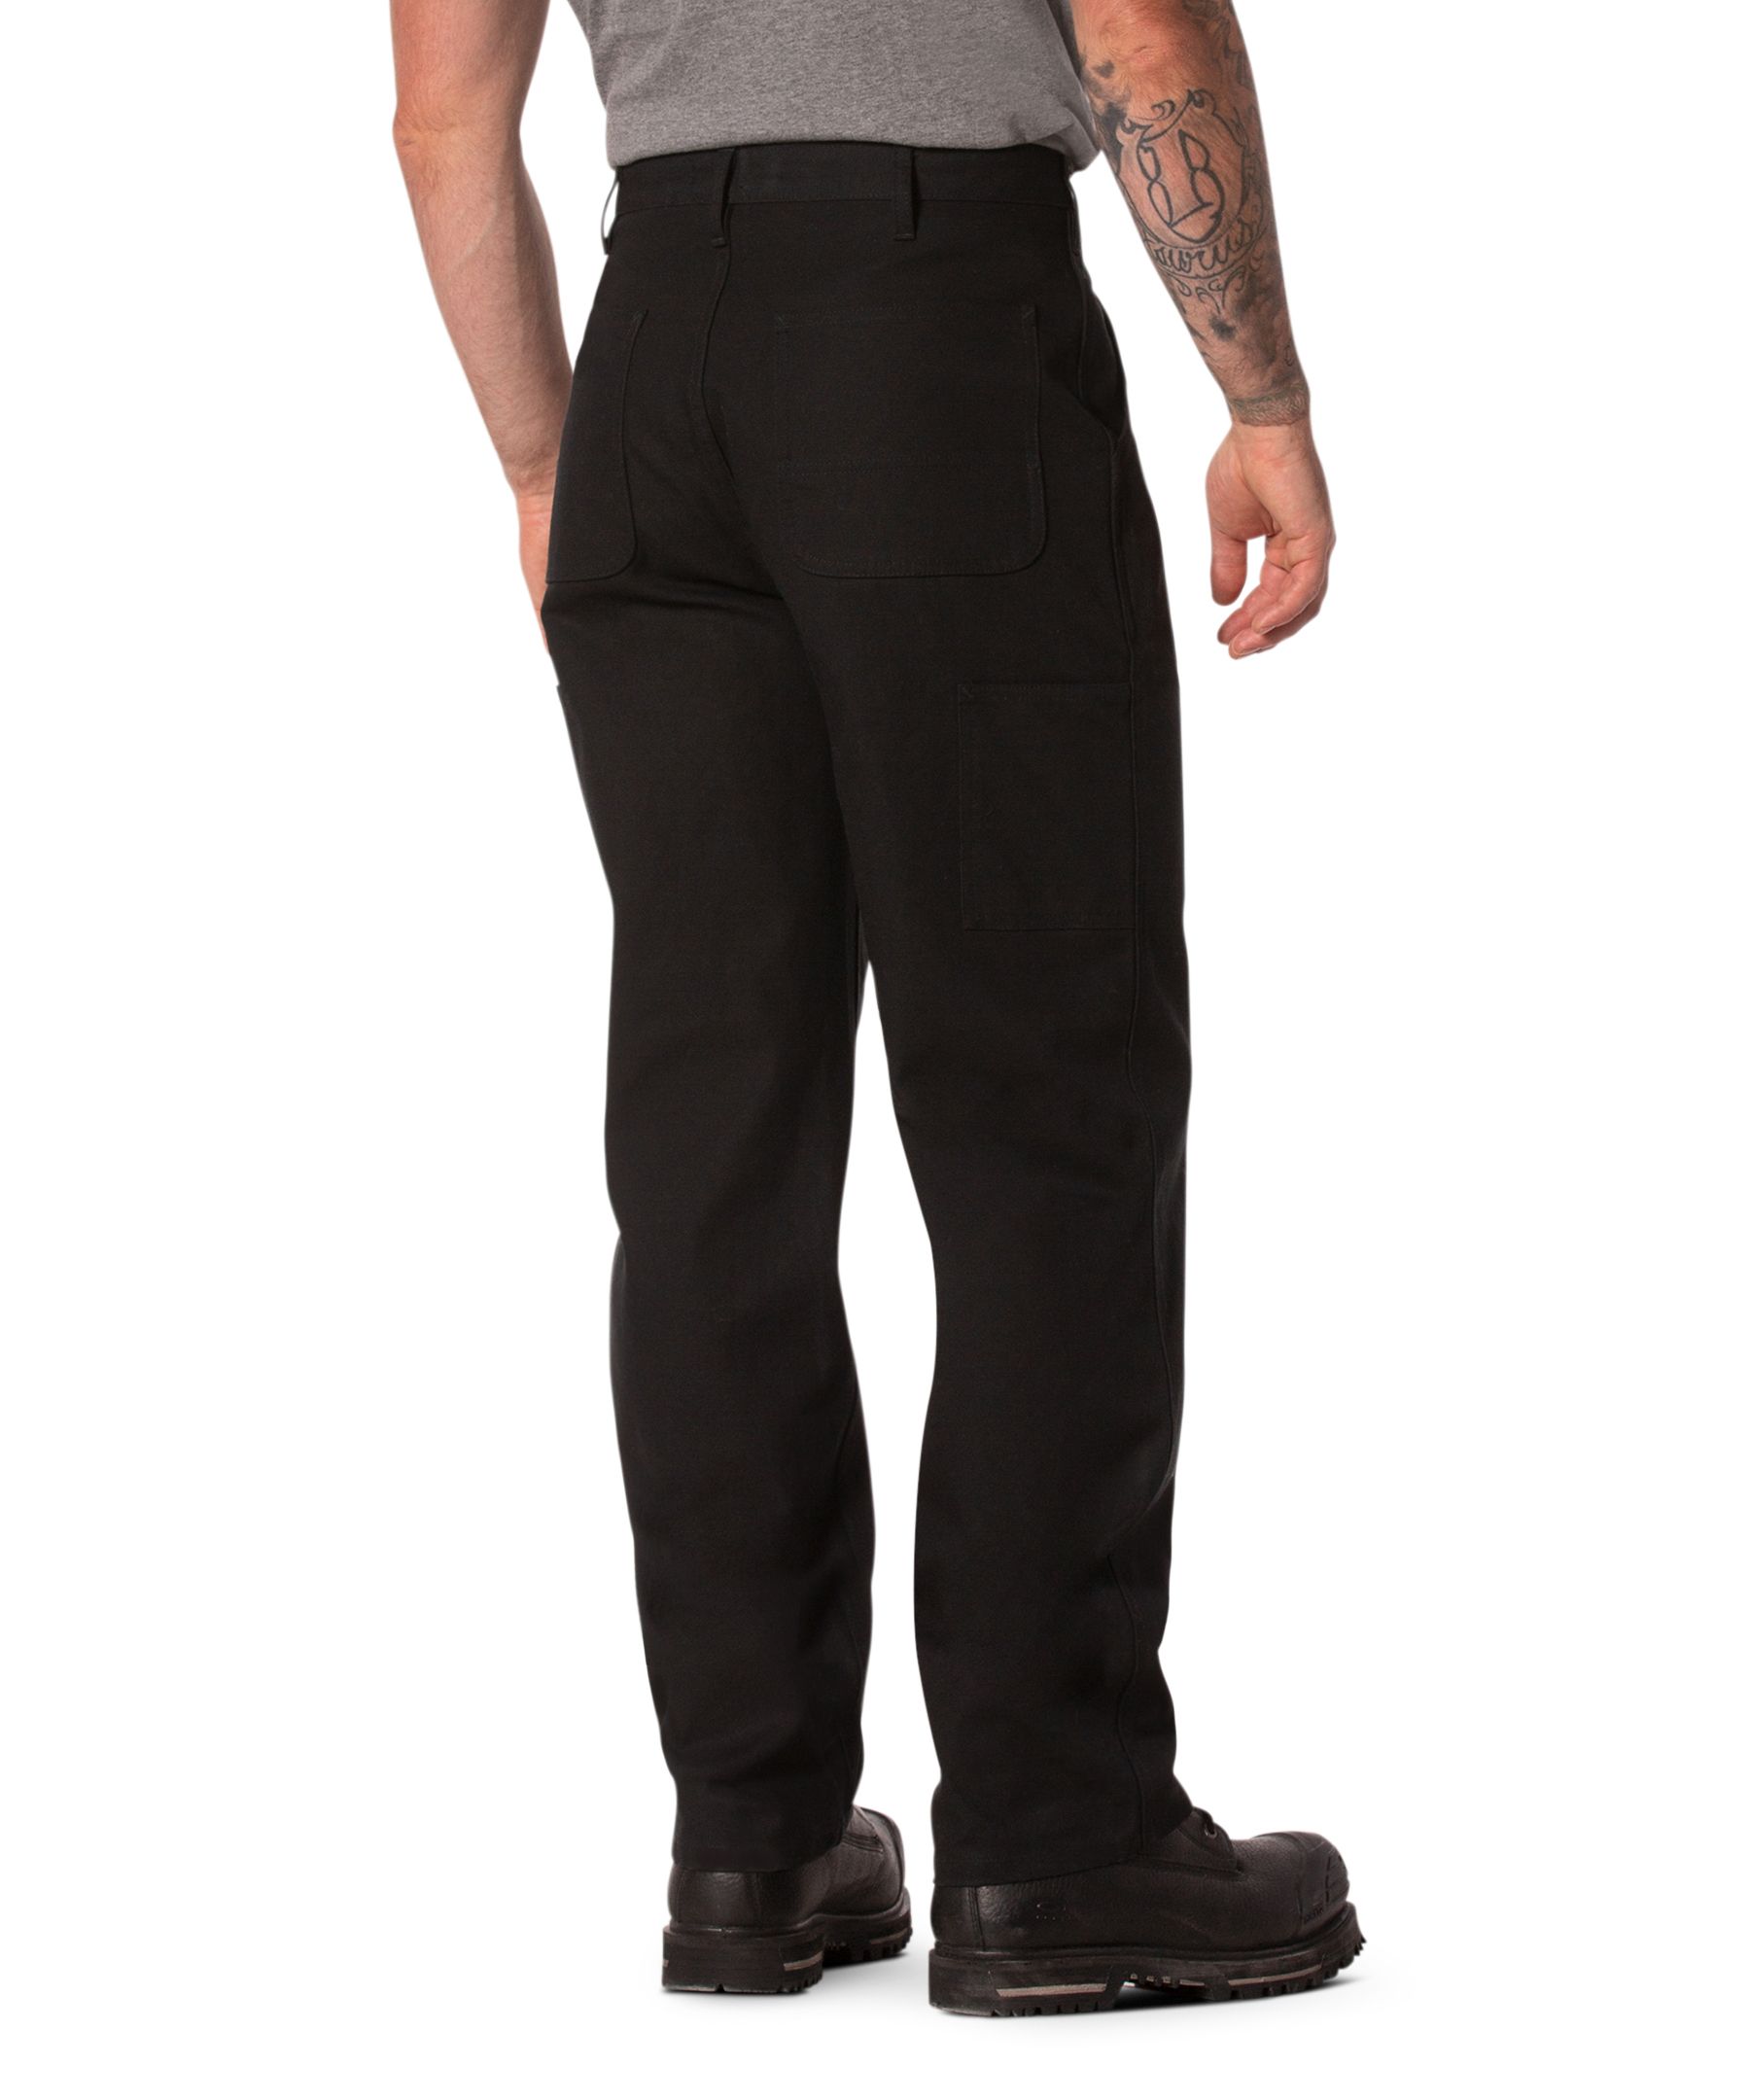 https://media-www.marks.com/product/workwear/work-pants/duck-work-pants/410018484233/aggressor-duck-work-pant-black-30-30-6fd68af1-c066-4636-a3aa-f2dcc8cd4505-jpgrendition.jpg?imdensity=1&imwidth=1244&impolicy=mZoom